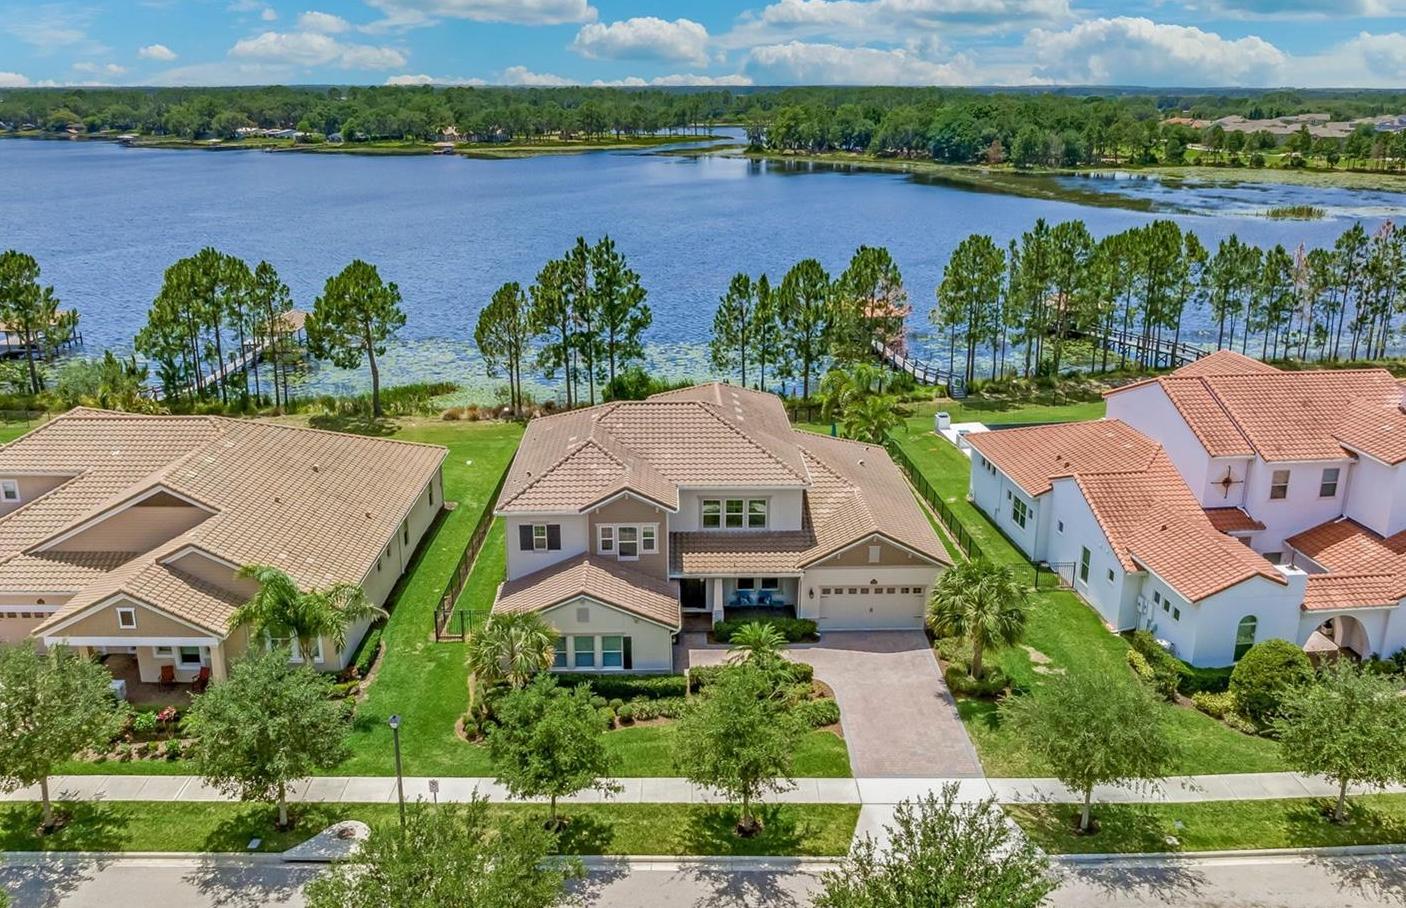 drone shot of two story home with lake and sky